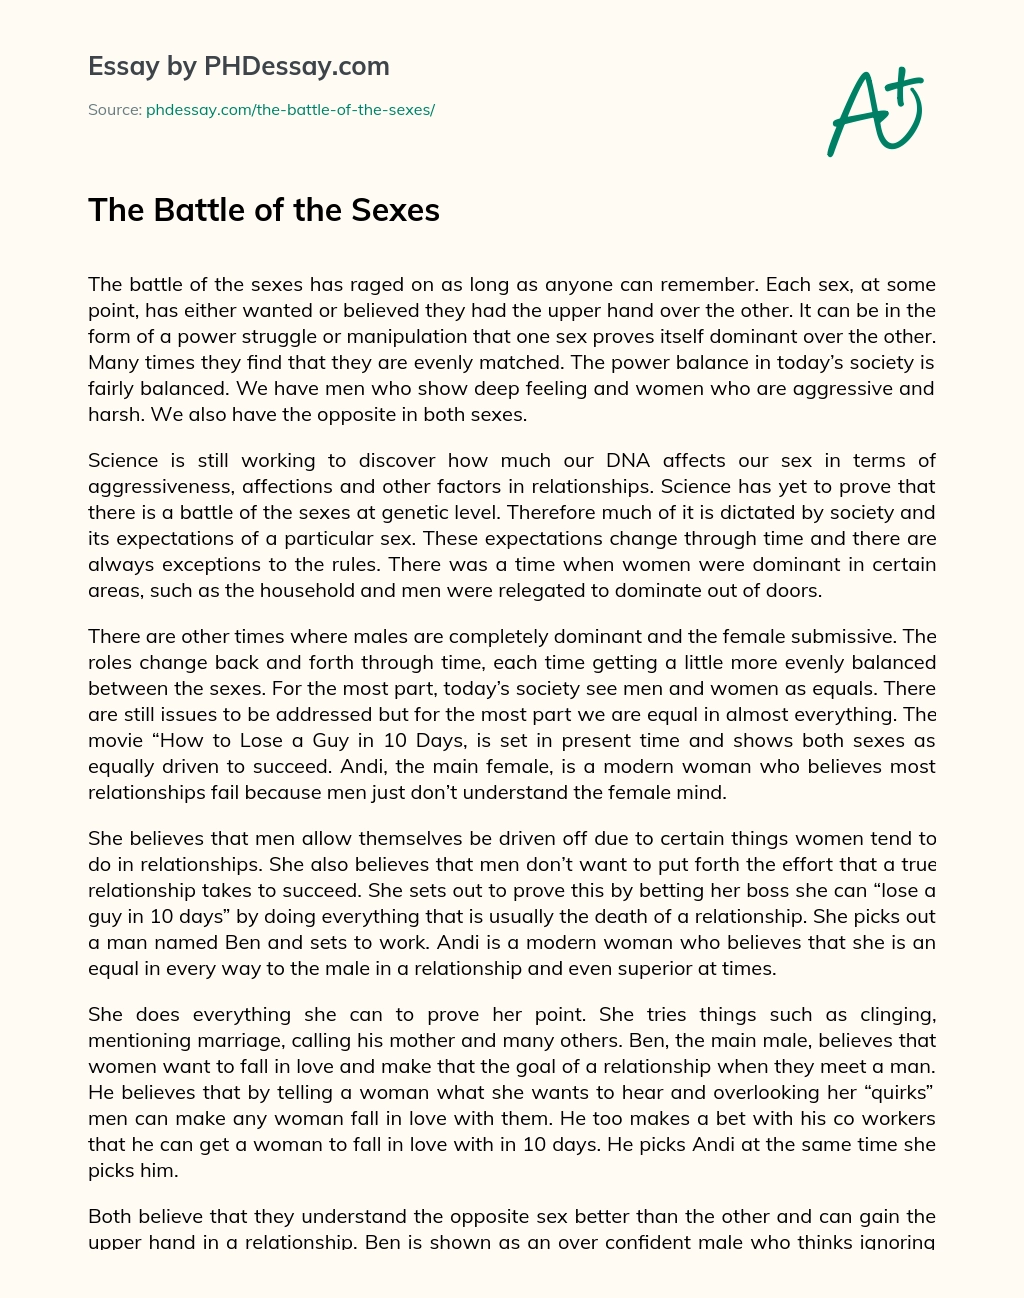 The Battle of the Sexes essay